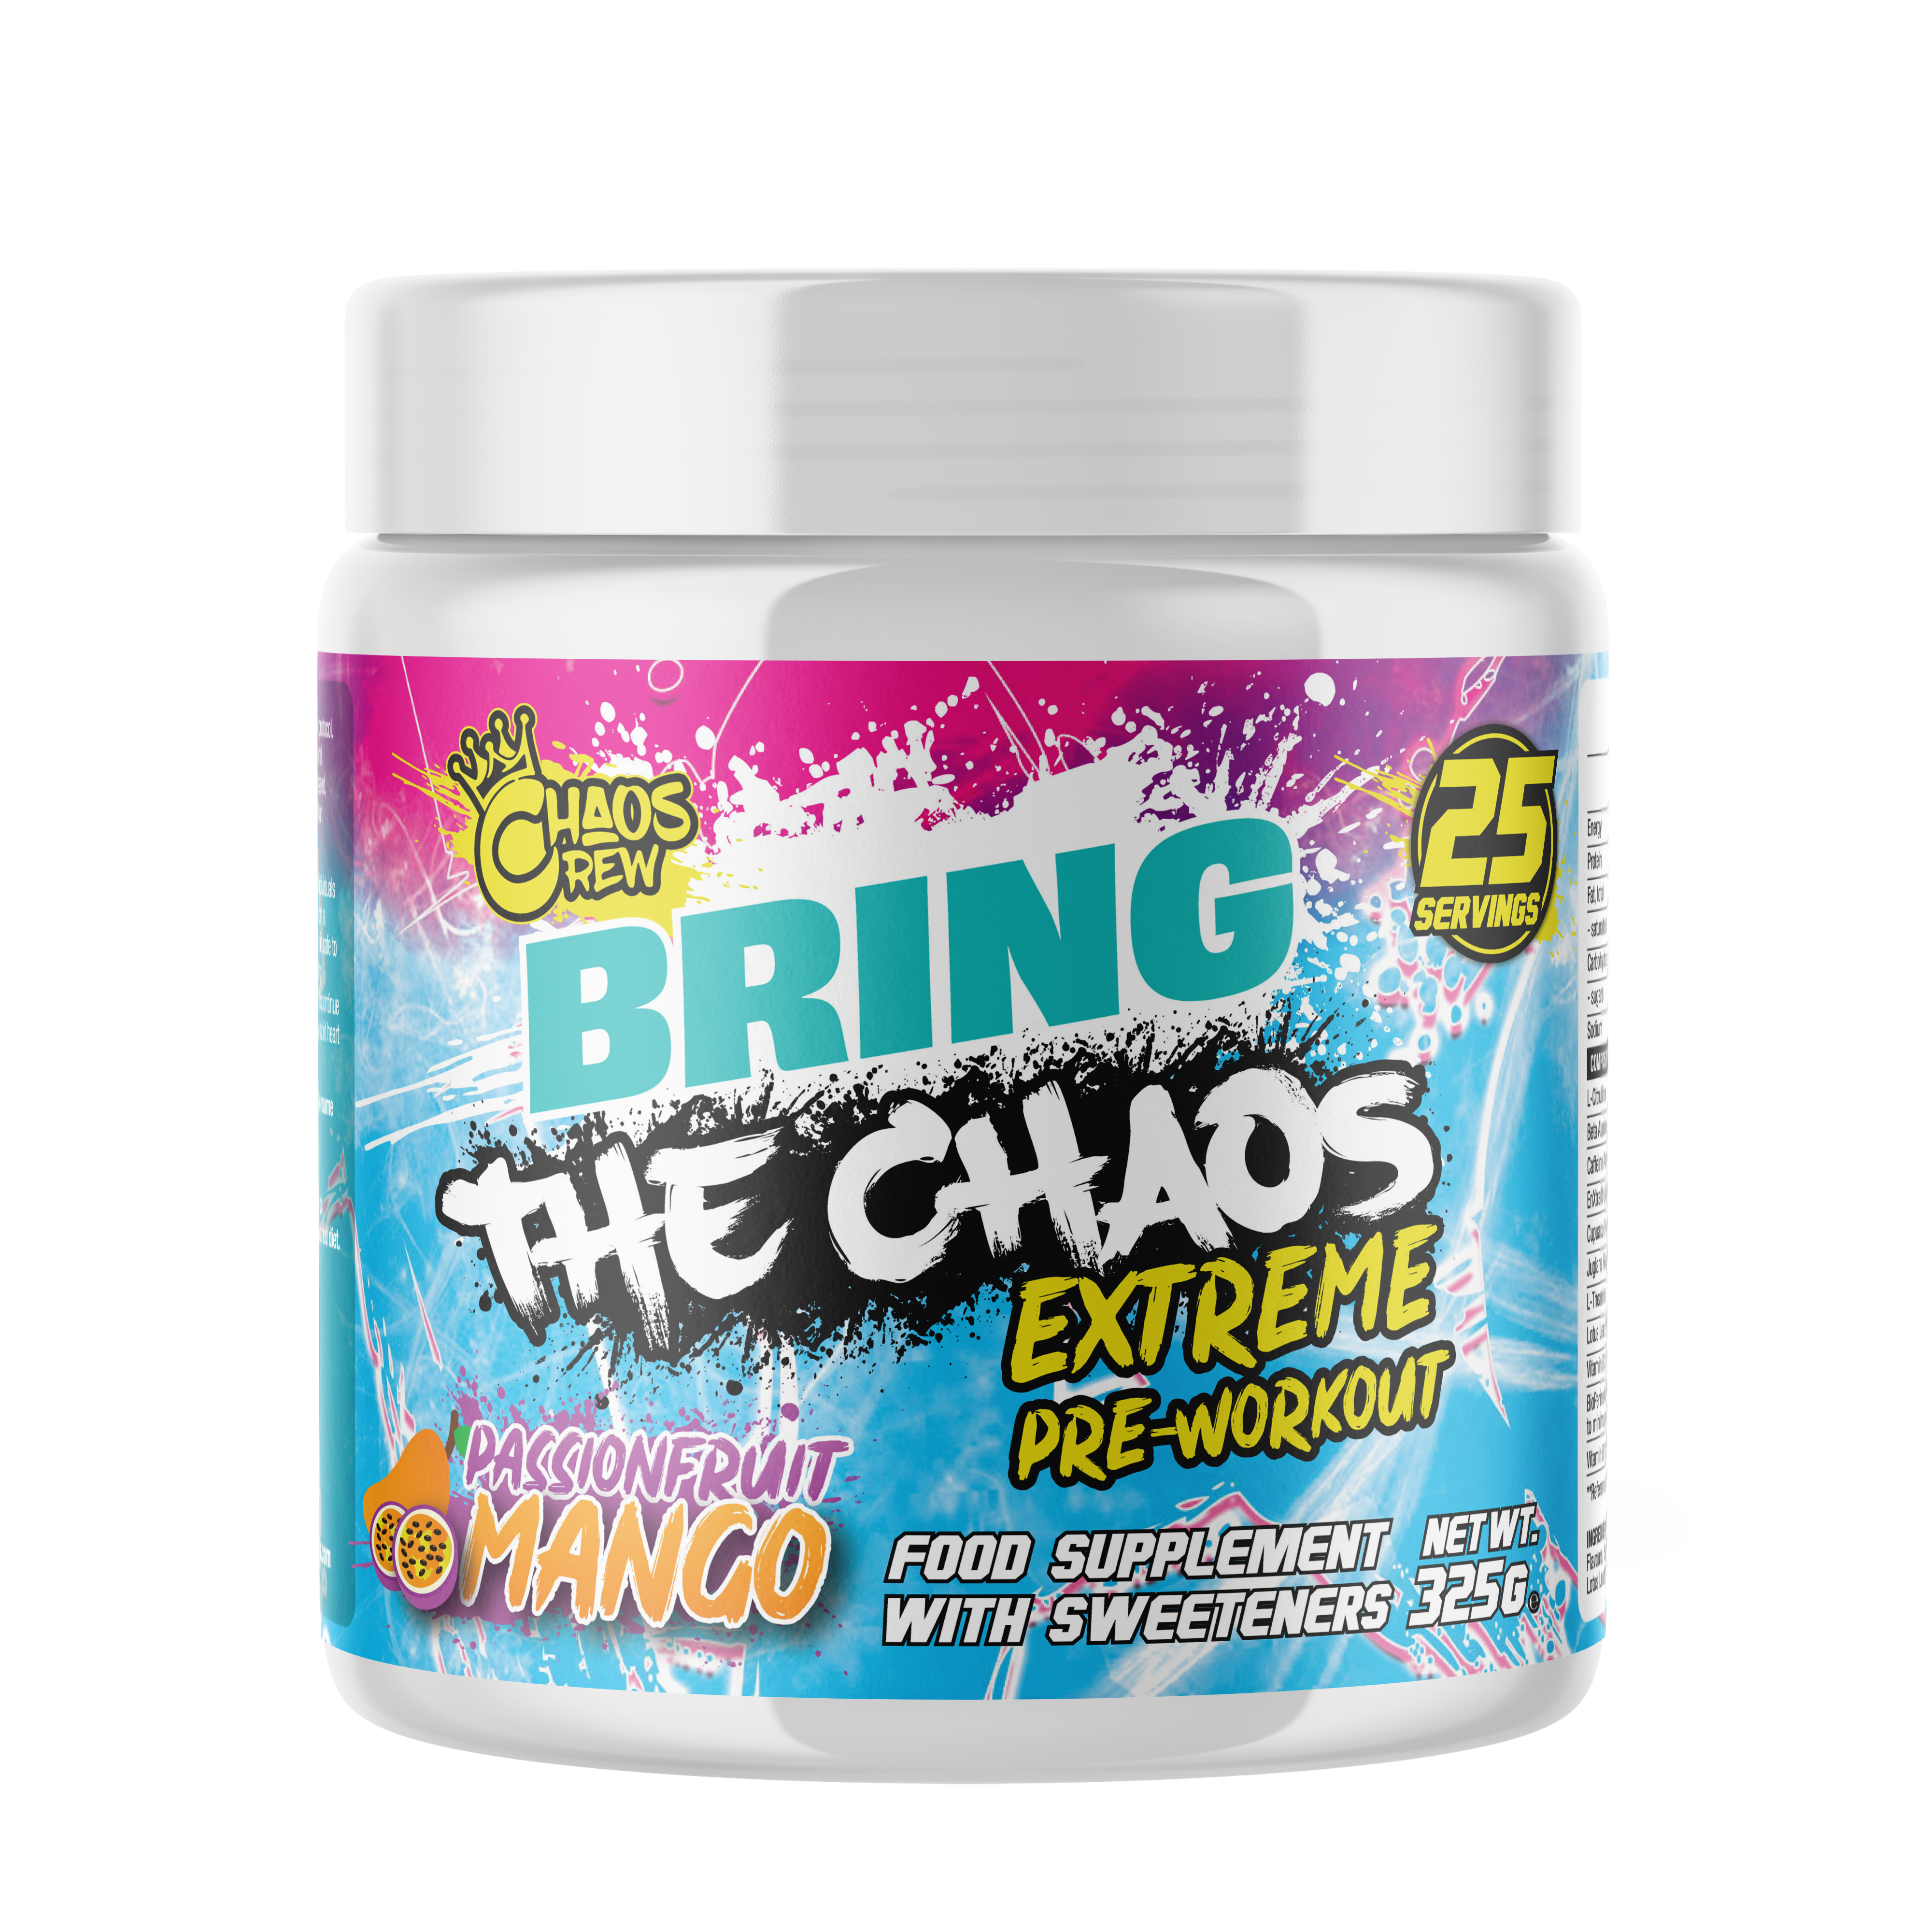 Chaos Crew Bring The Chaos EXTREME 325g - Pre Workout